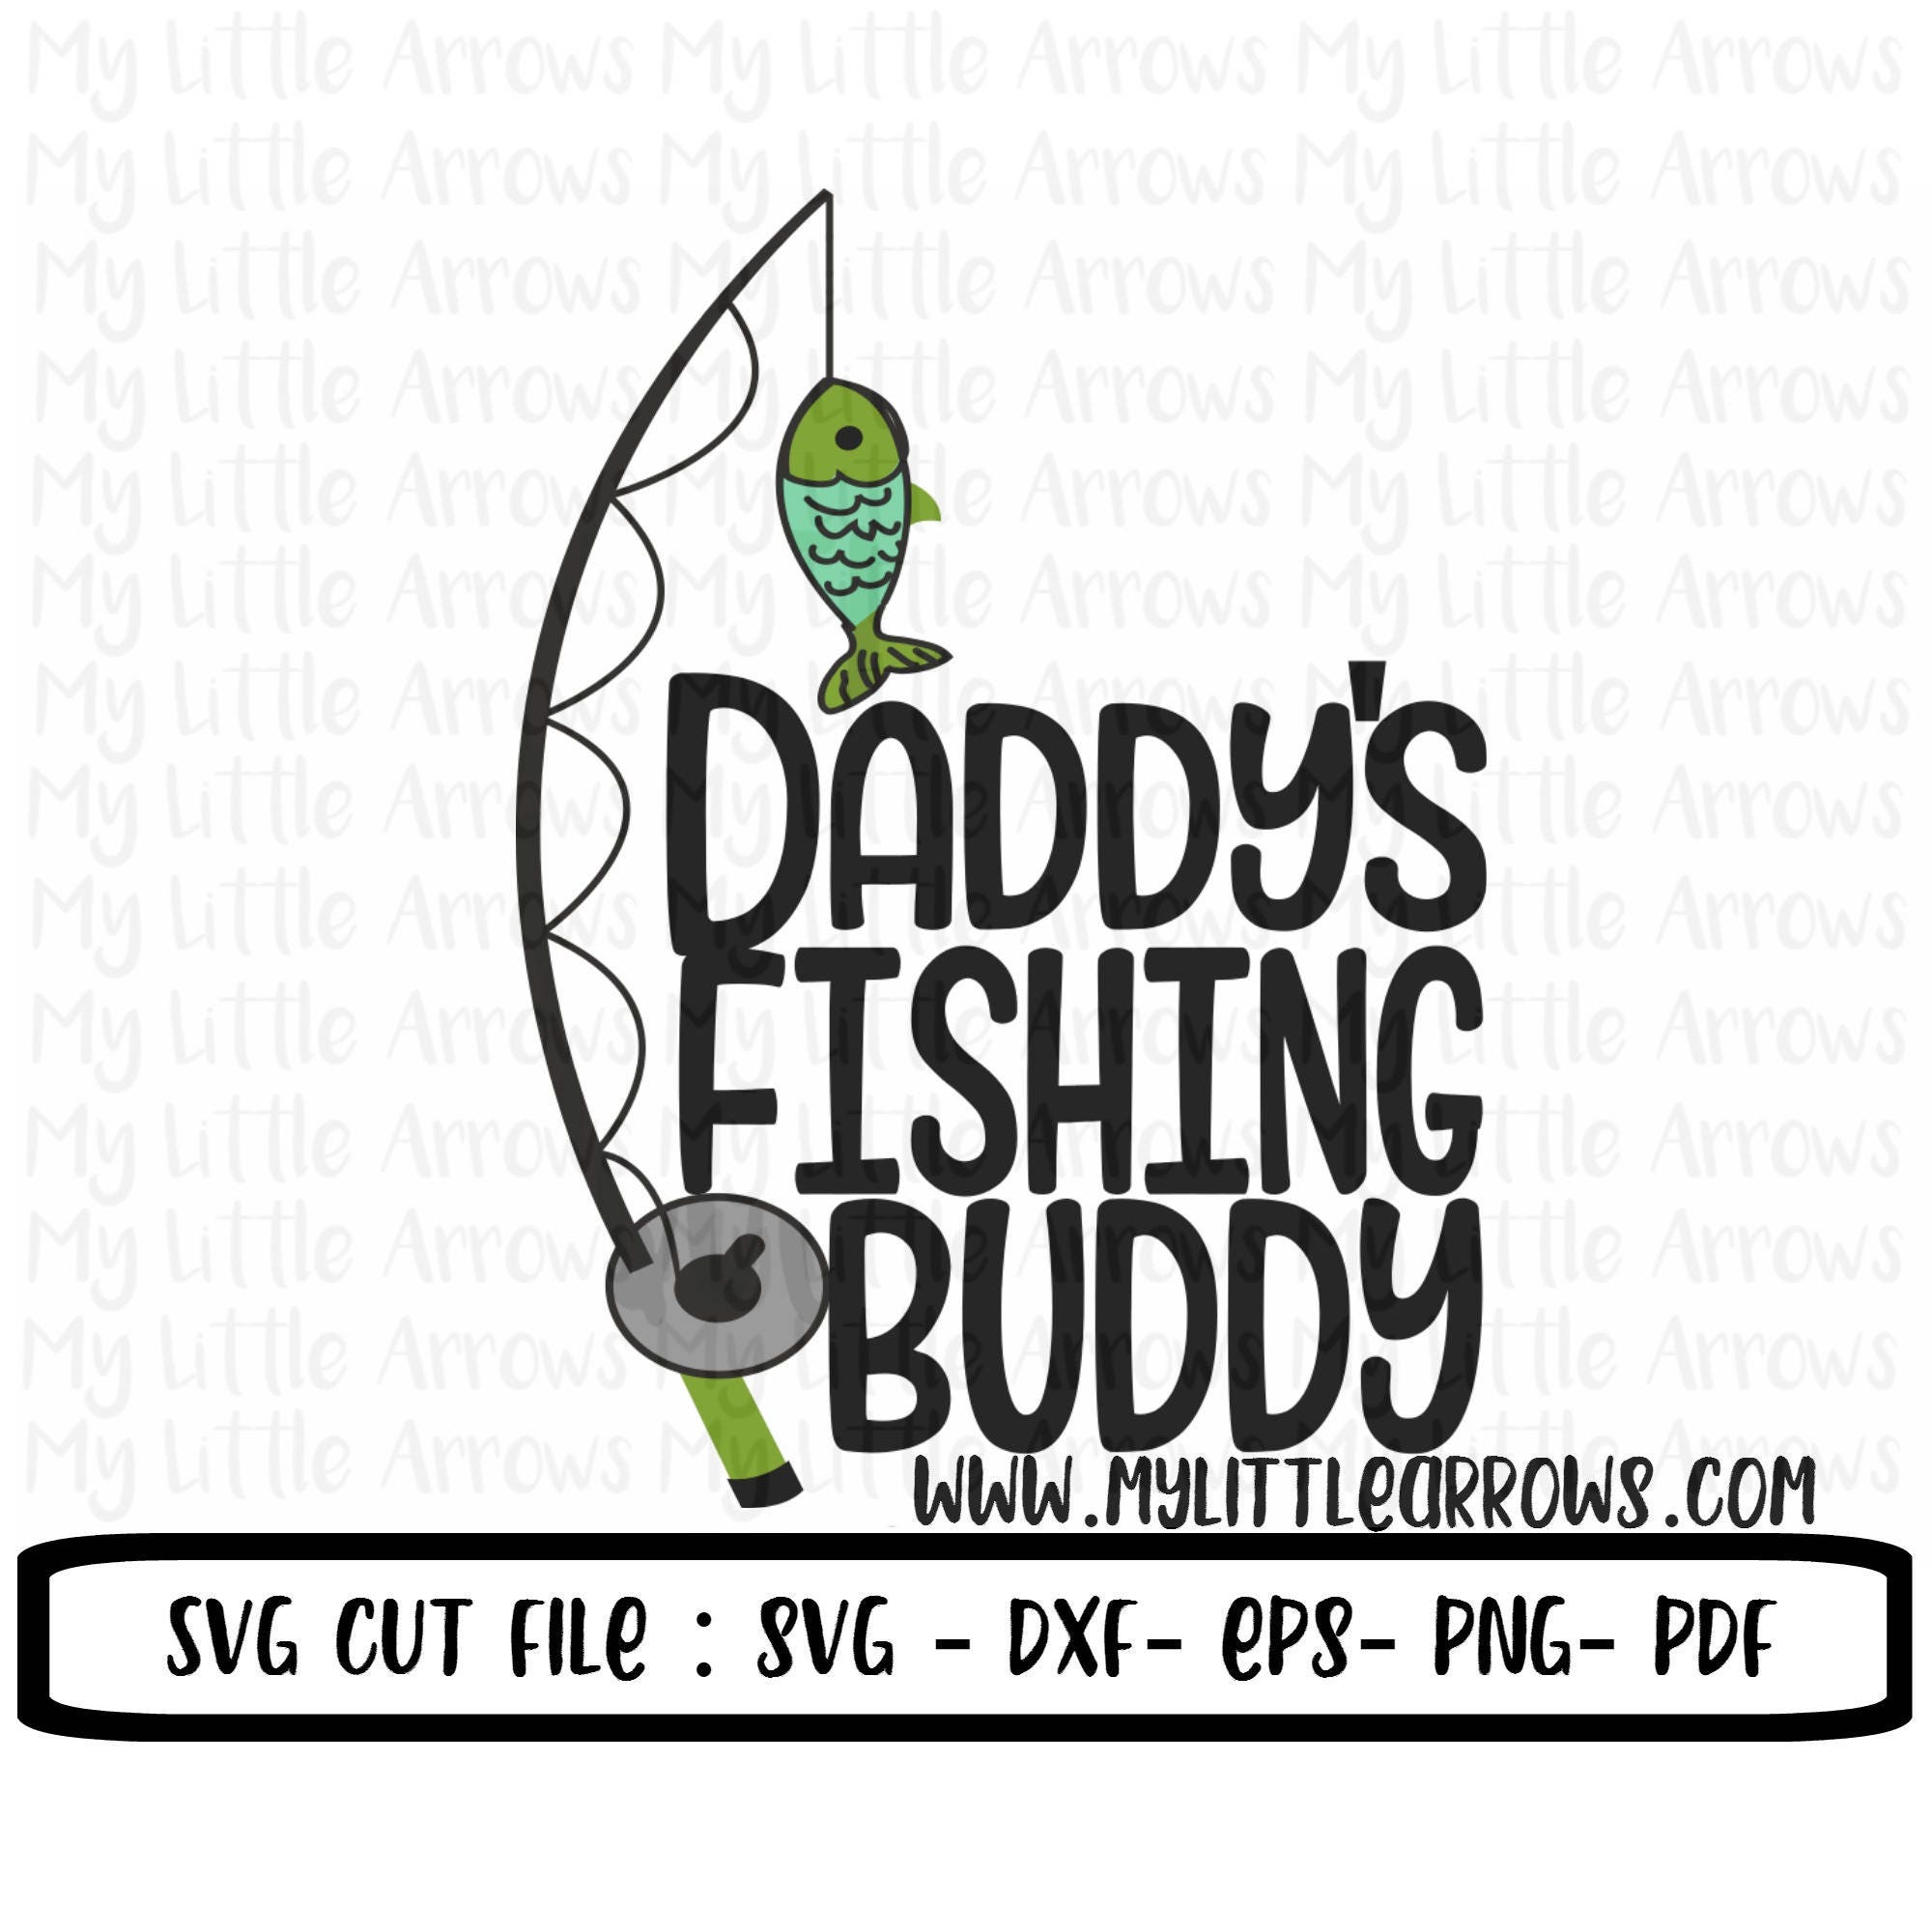 Download Daddy's fishing buddy SVG, DXF, EPS, png Files for Cutting ...